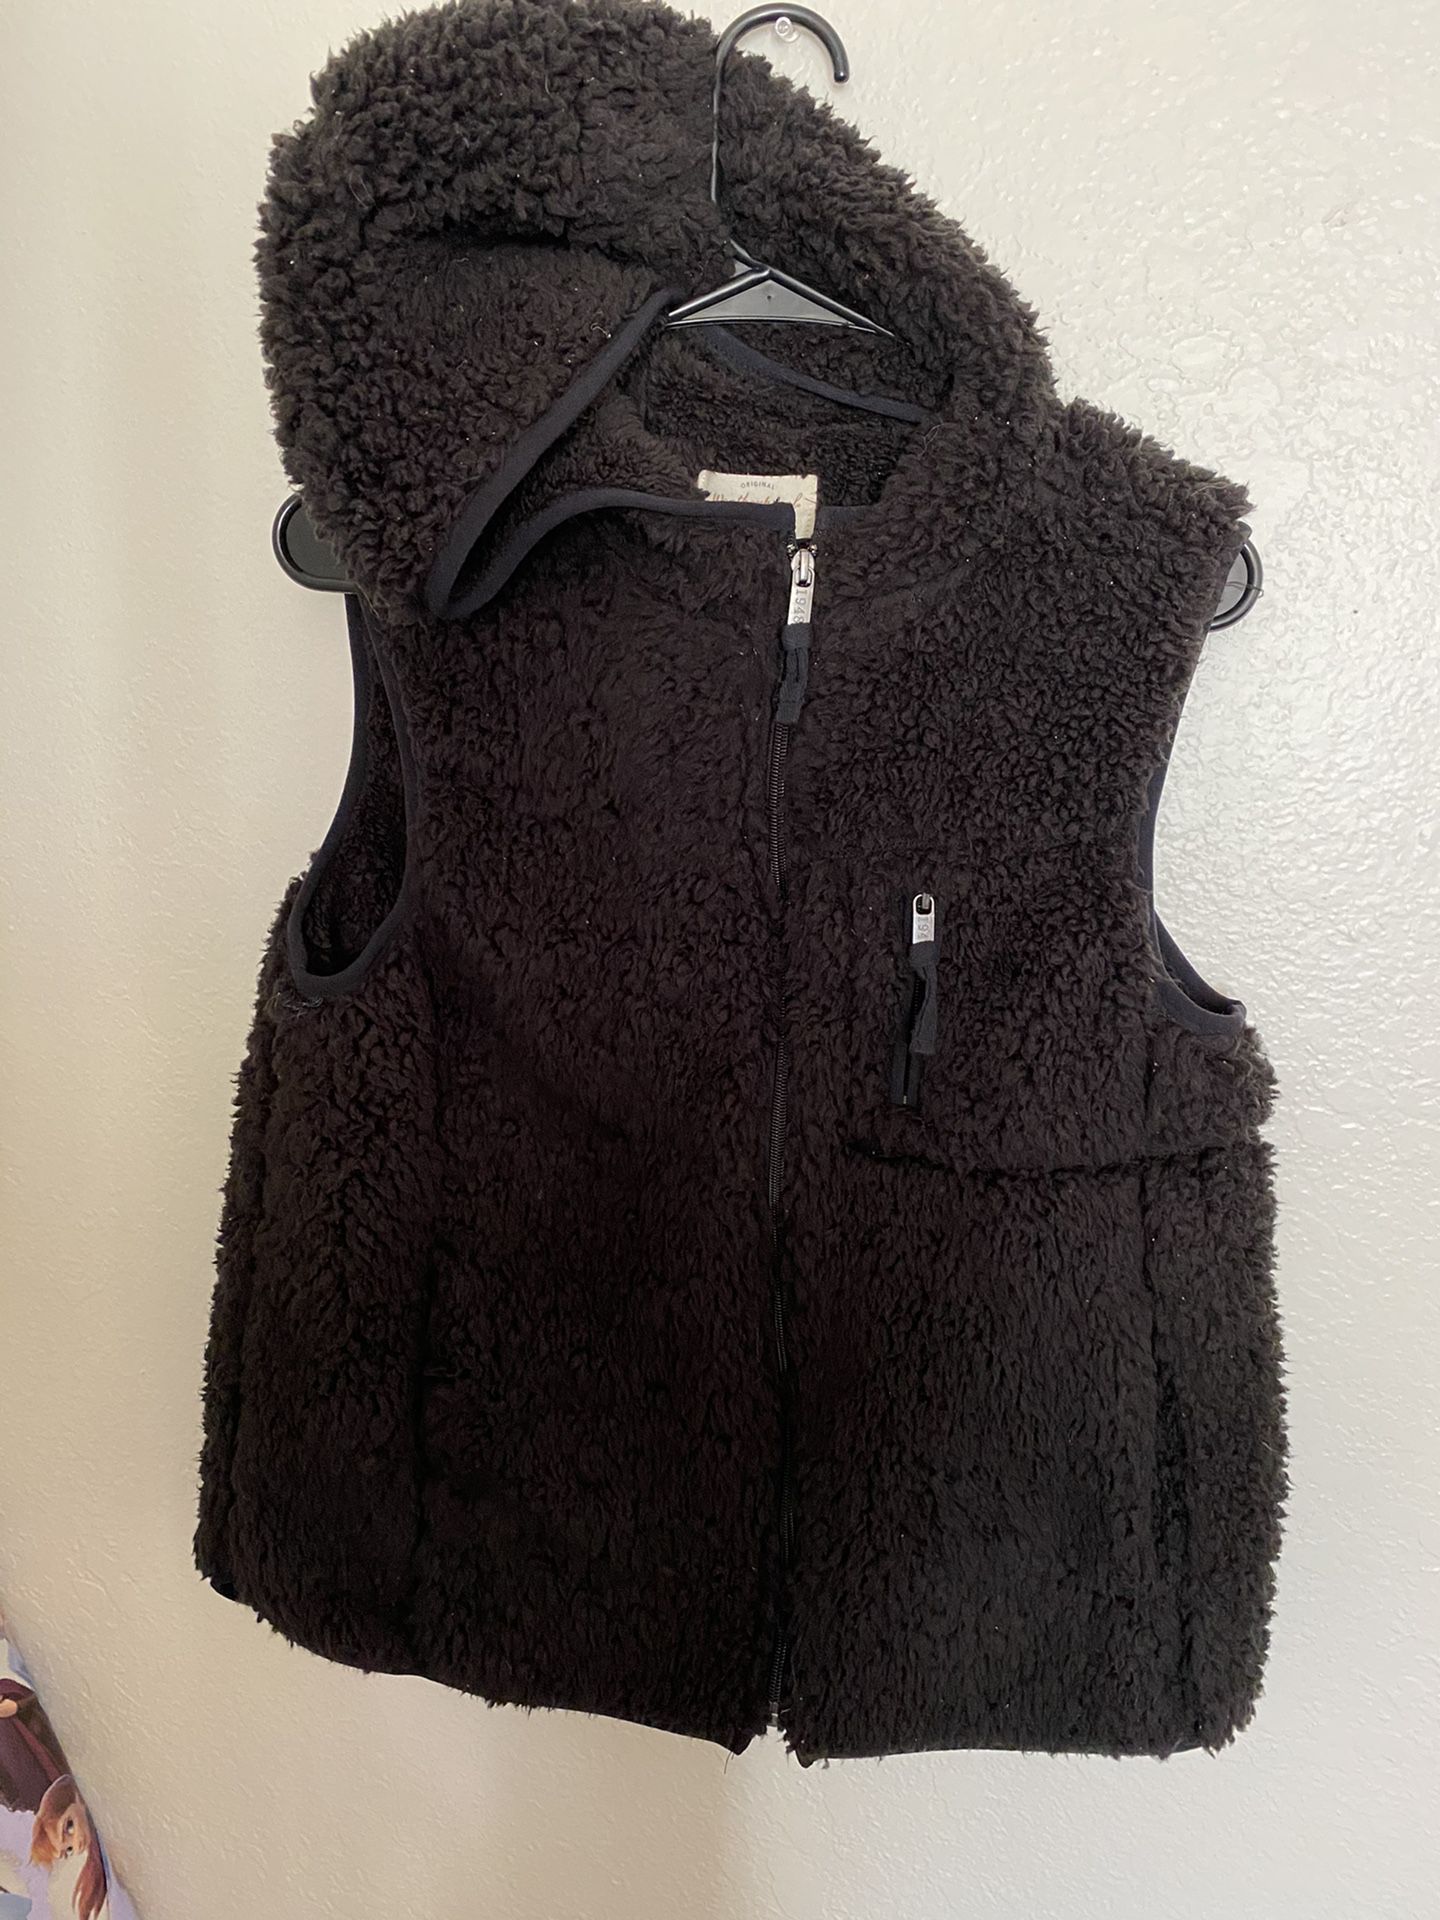 Black Sherpa vest, new never worn without tag size smal